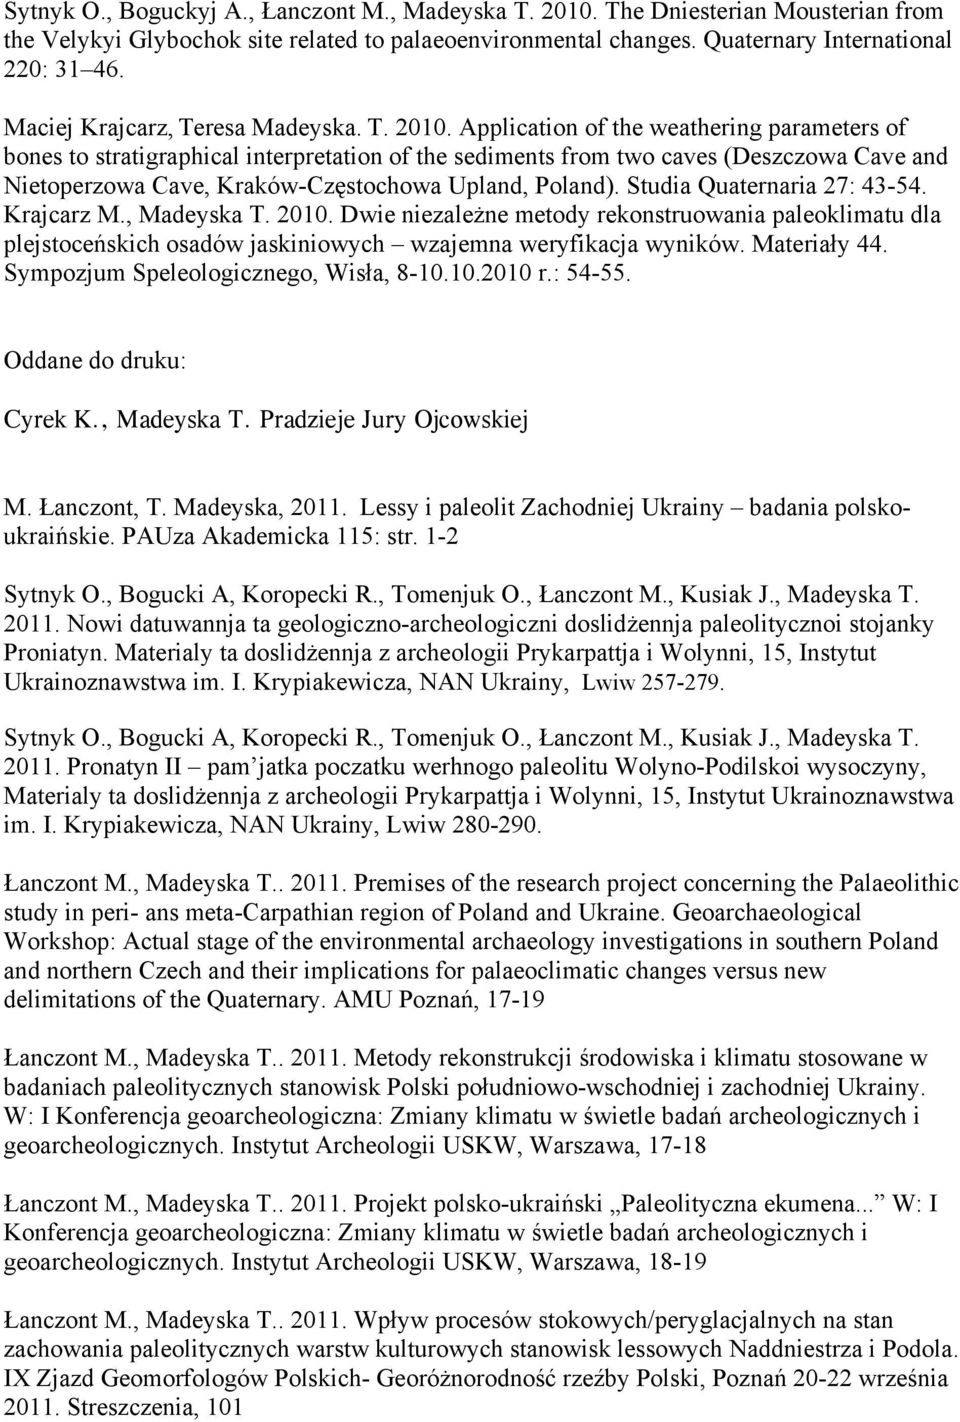 Application of the weathering parameters of bones to stratigraphical interpretation of the sediments from two caves (Deszczowa Cave and Nietoperzowa Cave, Kraków-Częstochowa Upland, Poland).